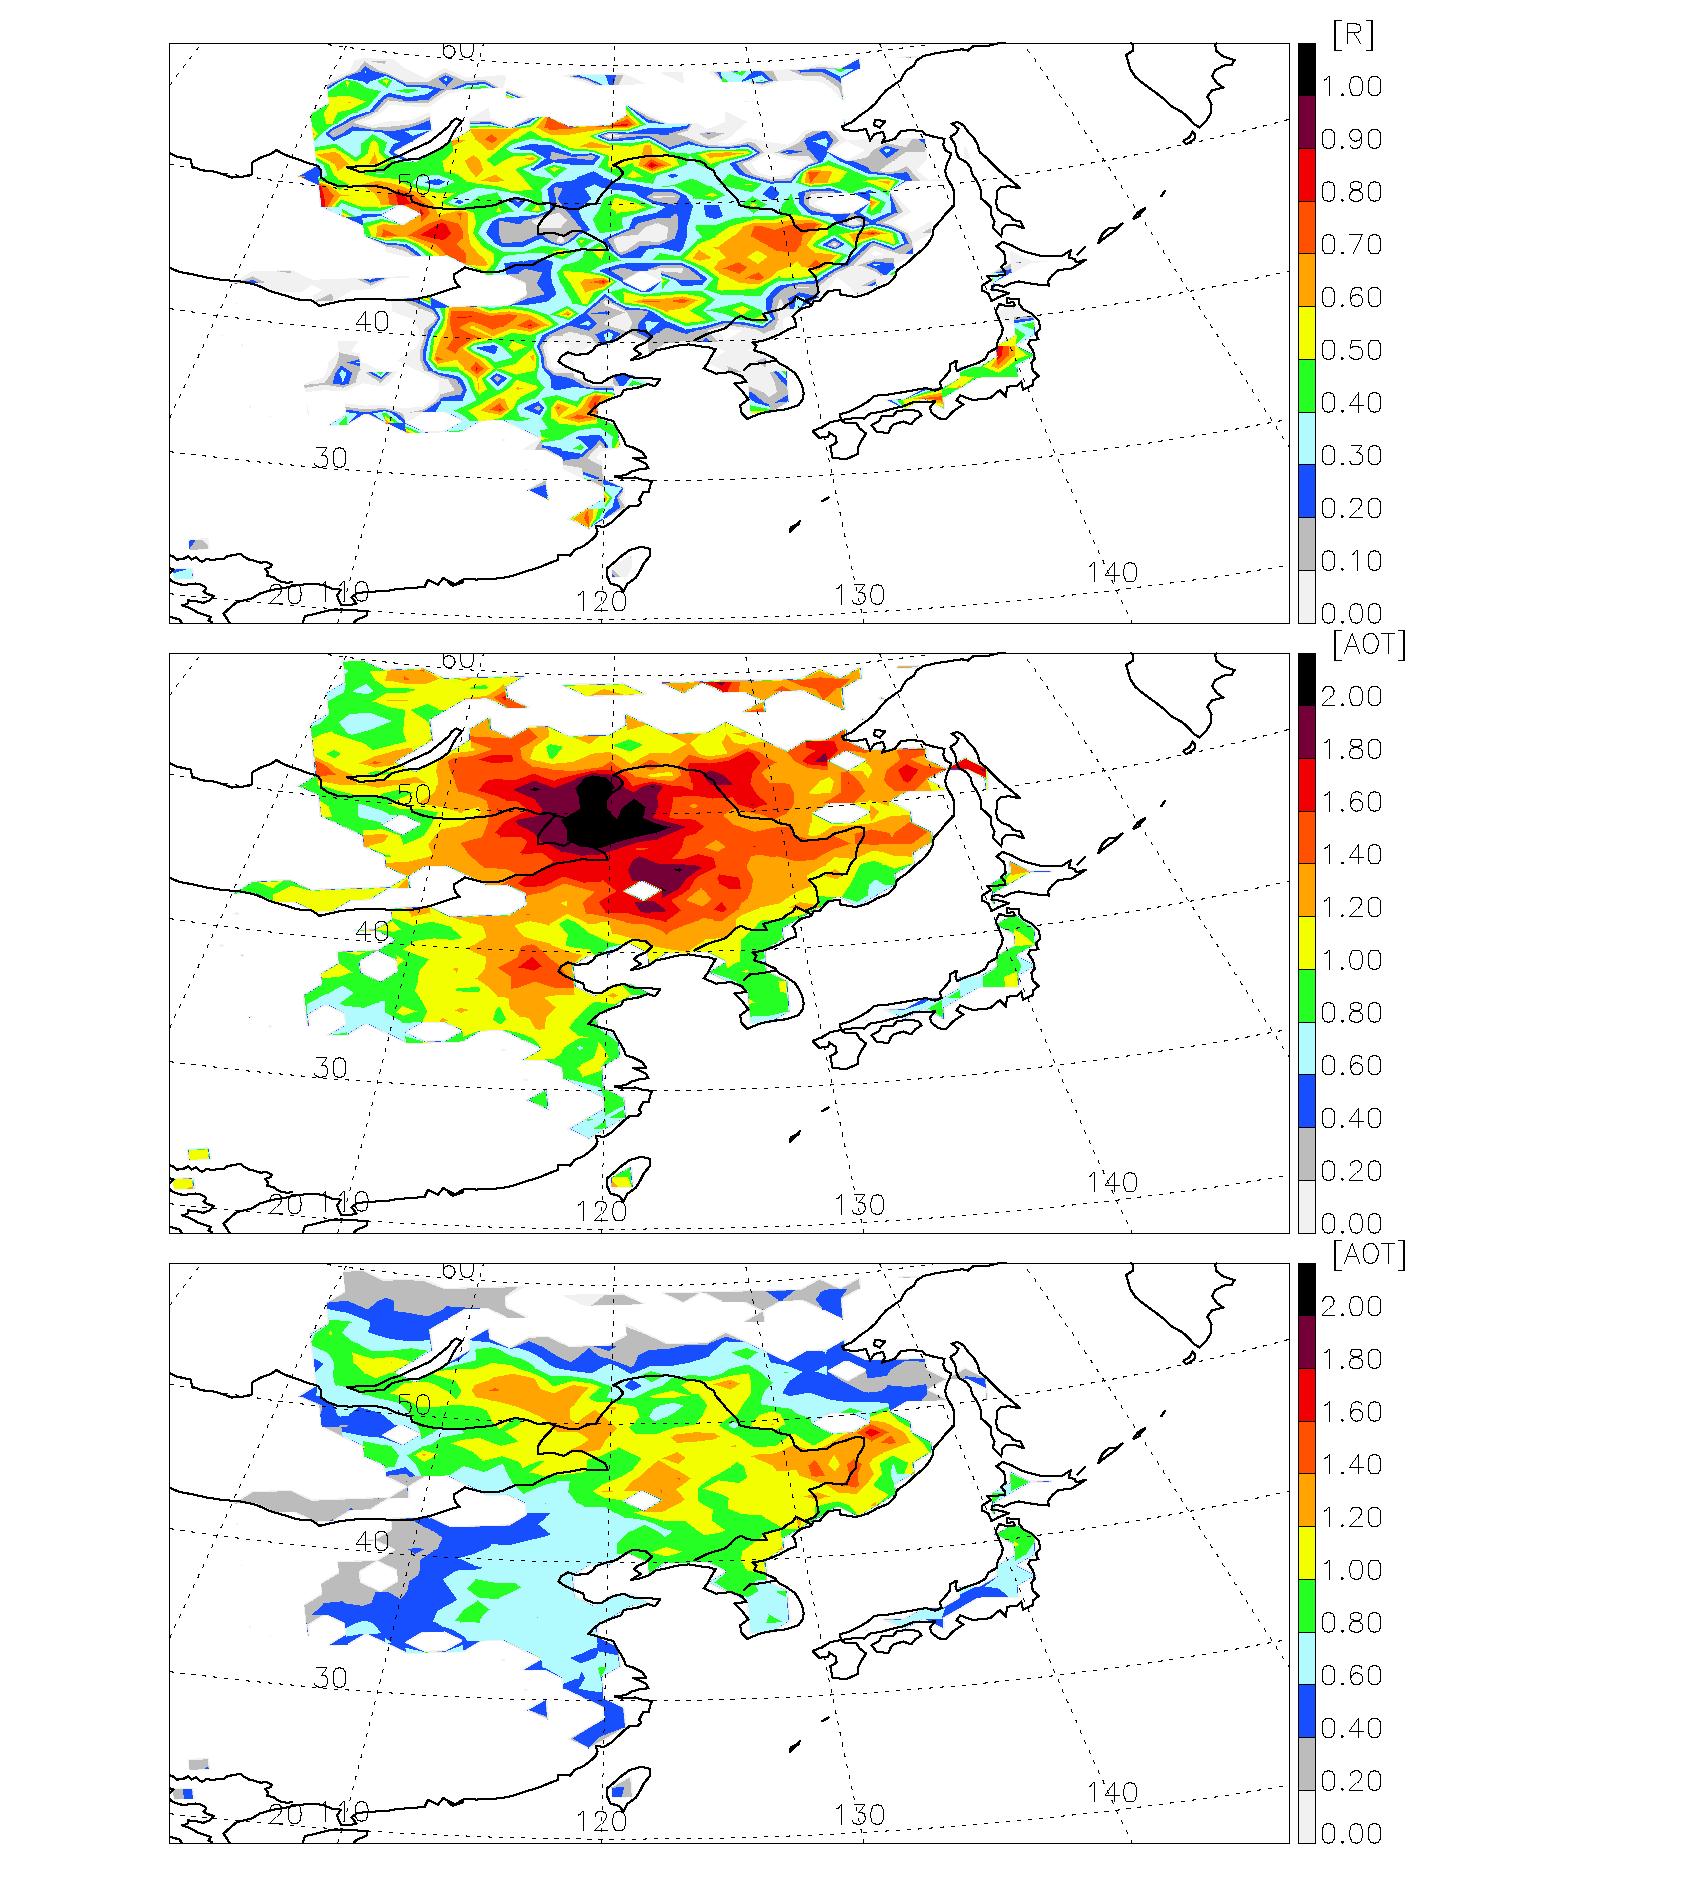 Comparison of the CMAQ model result (midle) and MODIS observation result (bottom) for May 2003. Upper plot is the correlation coefficient plot between the observation and modeling results.